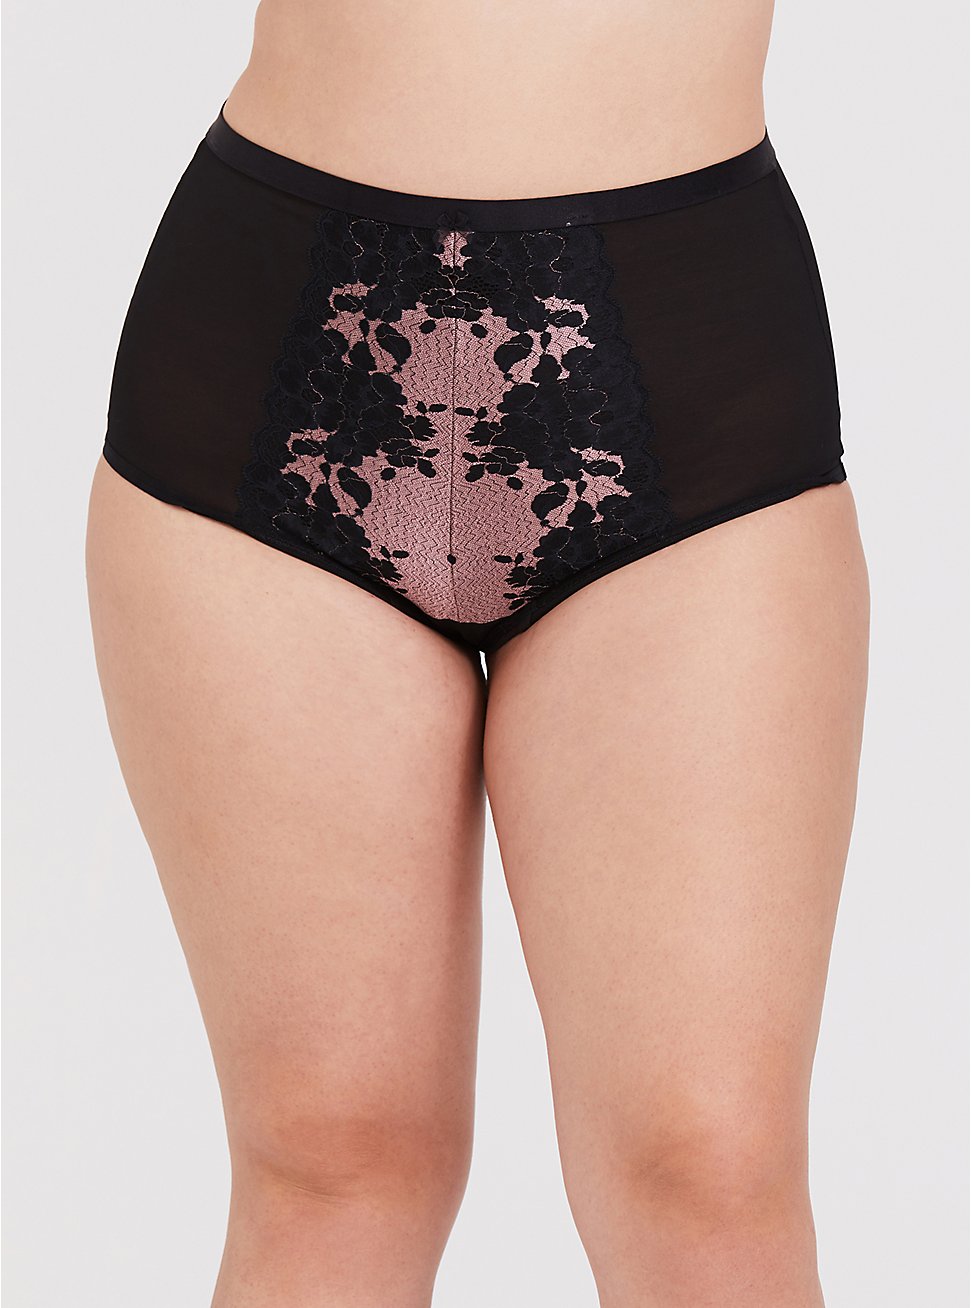 Two Tone Lace High-Rise Cheeky Lattice Back Panty, WARM PEONY PINK, hi-res